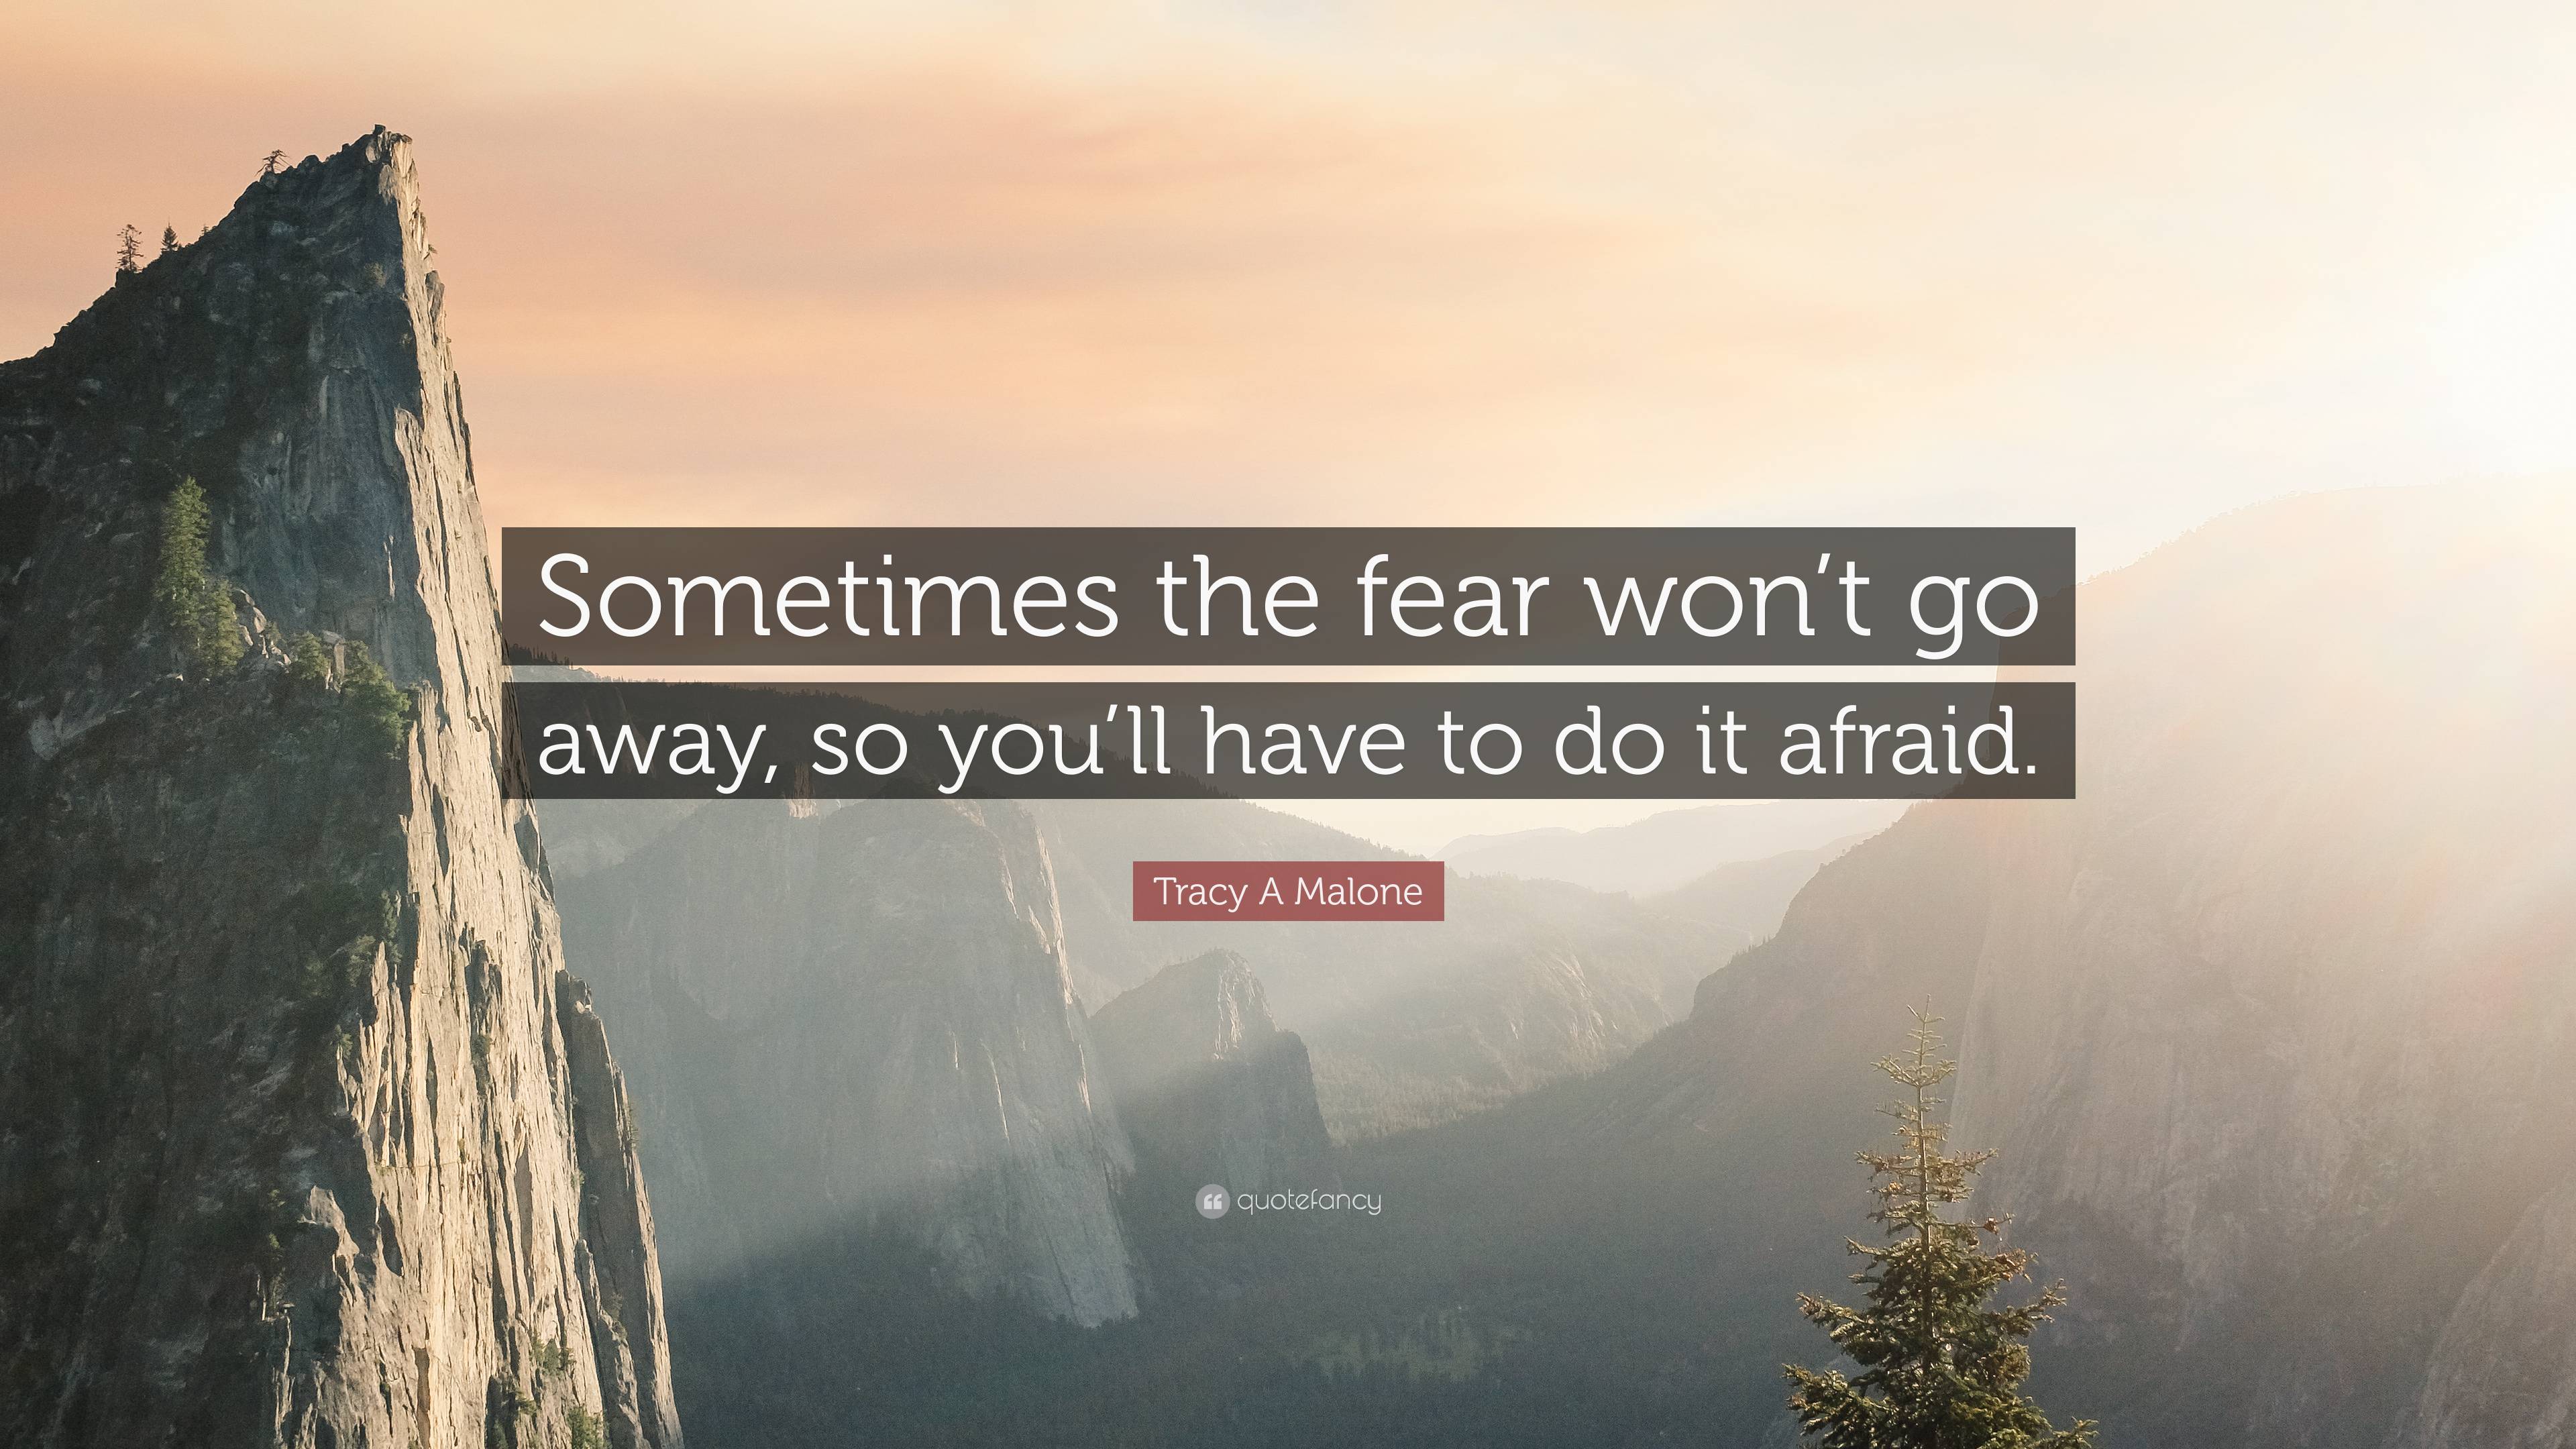 Tracy A Malone Quote “sometimes The Fear Wont Go Away So Youll Have To Do It Afraid” 